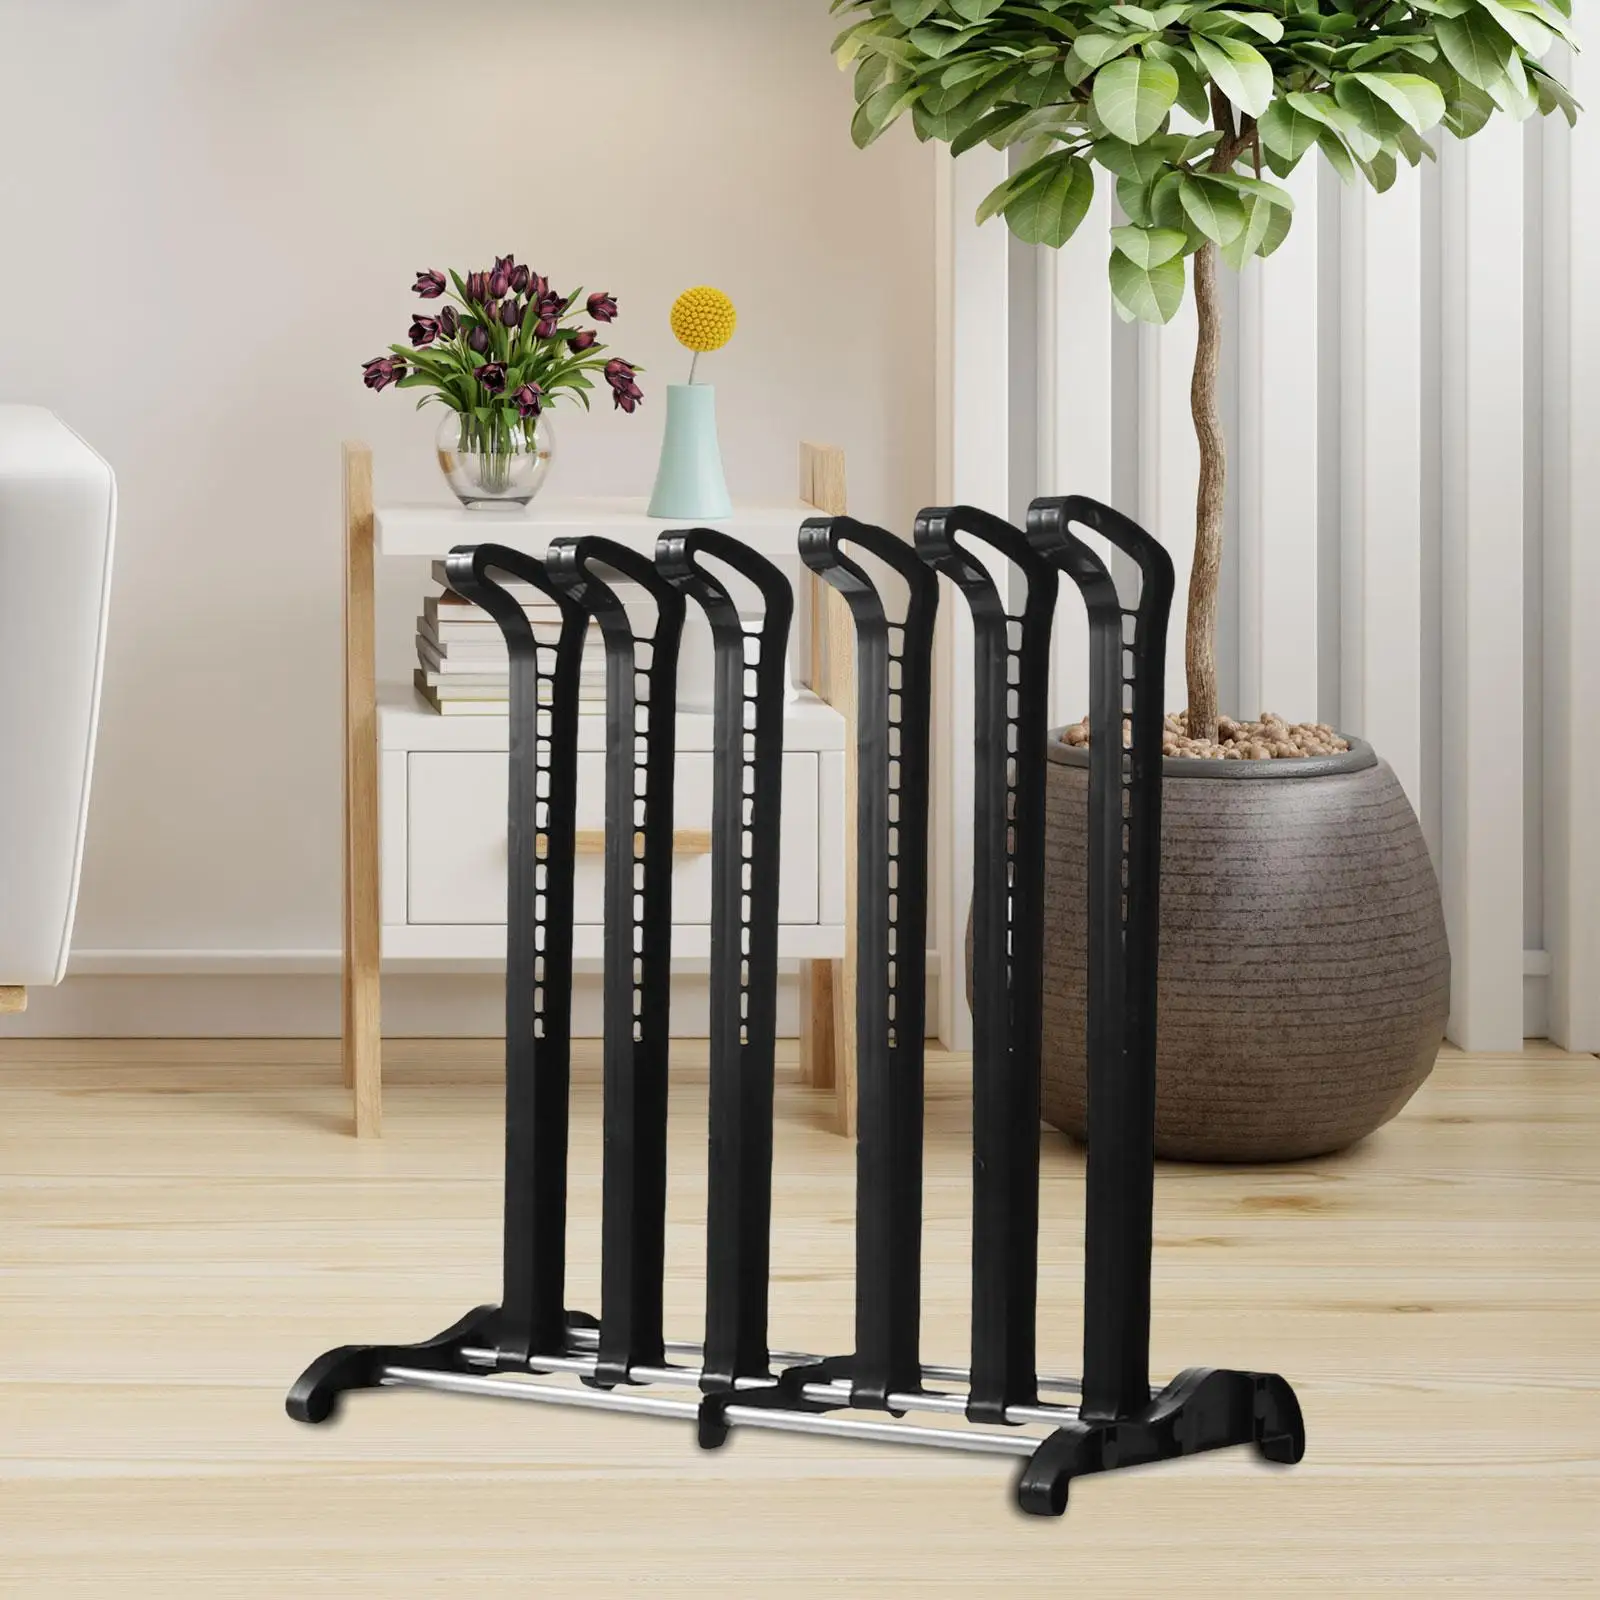 Boots Rack Easy to Install Shoe Stand Tools Boot Organizer for Dorm Room Bedroom Patio Outdoor Closet Tall Boots Storage